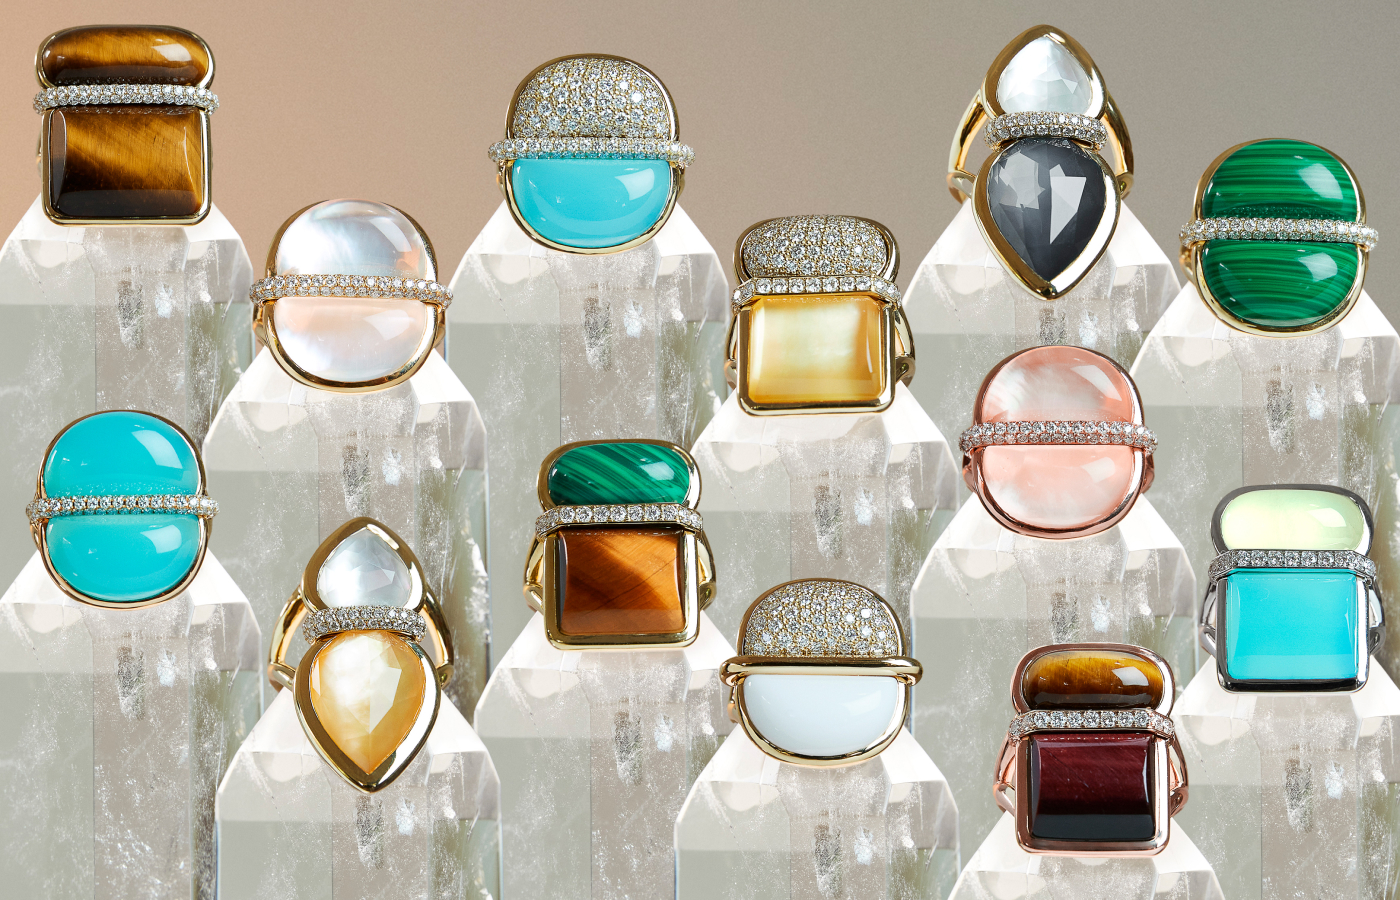 Selection of Marceline Paris rings from the Amrita collection in gold, rose gold, white ceramic, blue chalcedony, tiger's eye, malachite, white mother-of-pearl, bull's eye, phenite, yellow mother-of-pearl, citrine, white quartz, pink opal and diamond